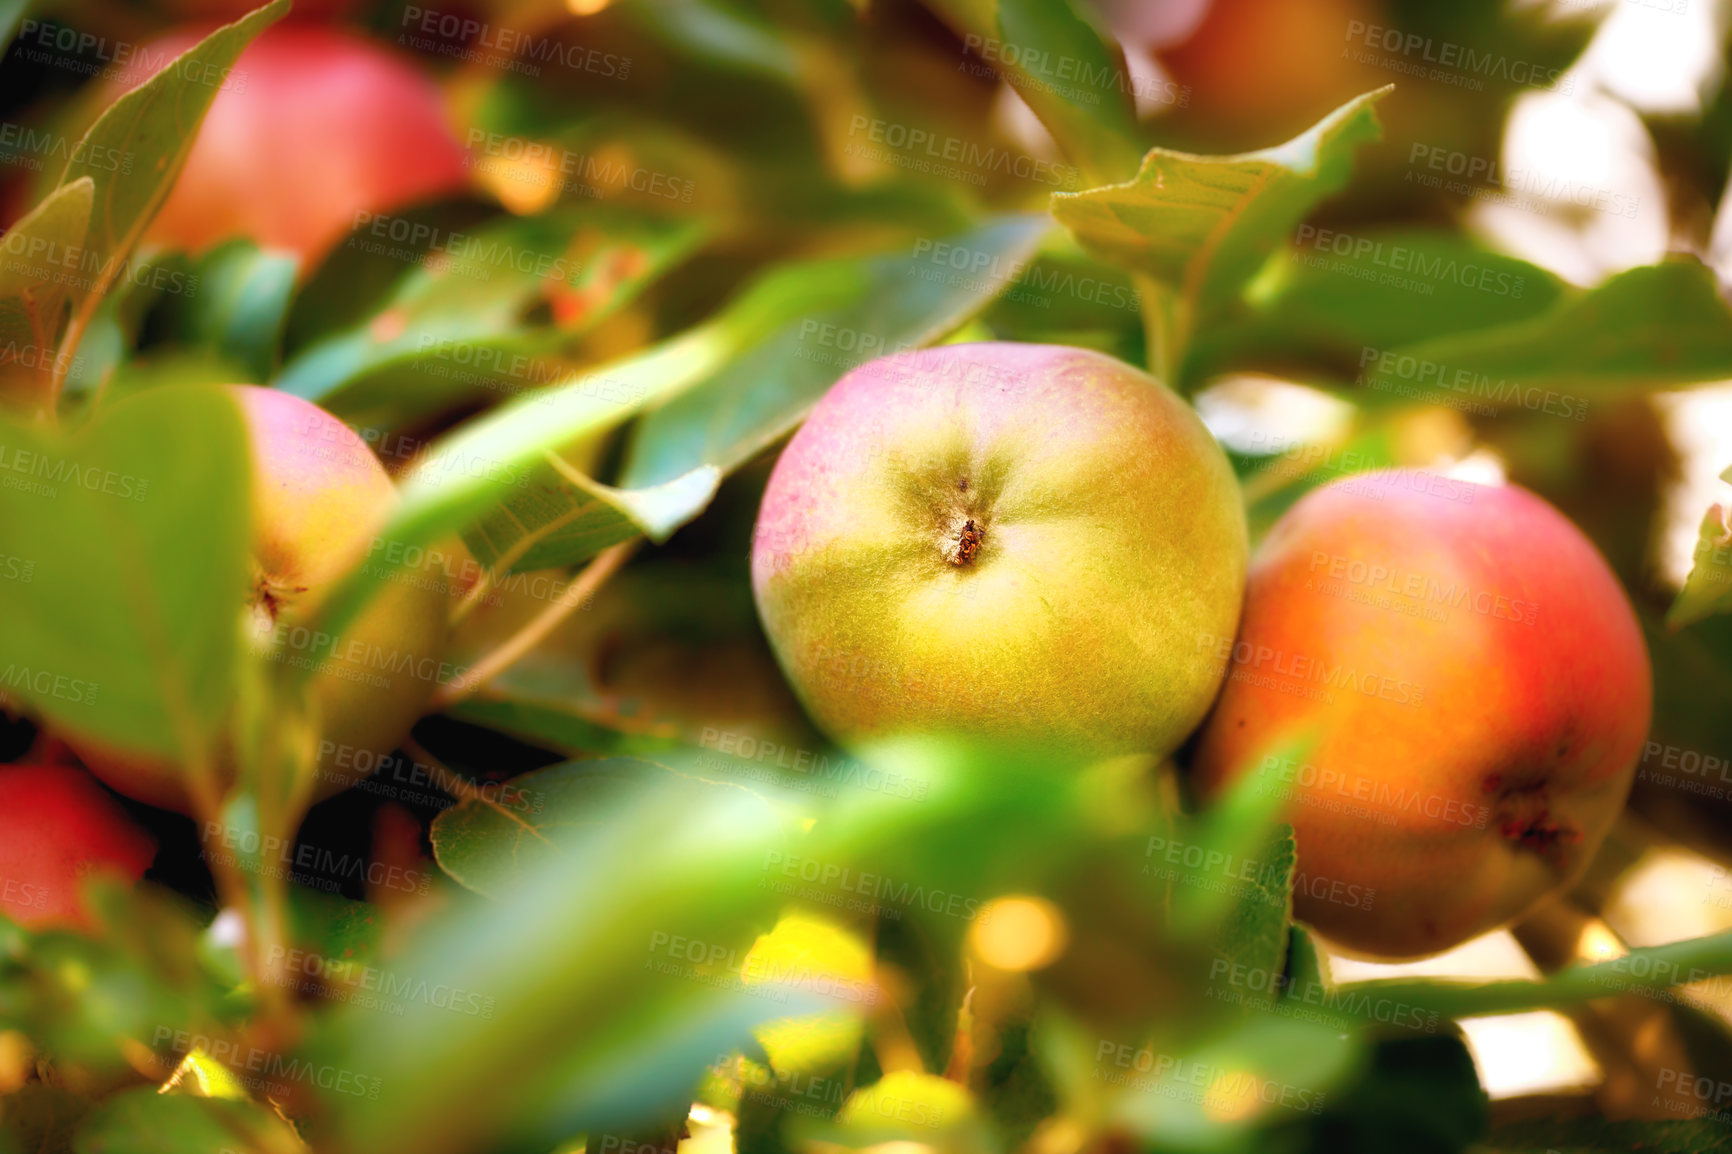 Buy stock photo Closeup of apples growing in a sunny orchard or farm outdoors. Fresh raw fruit being cultivated and harvested from trees with leaves in a garden. Nutritious and ripe produce ready to be picked